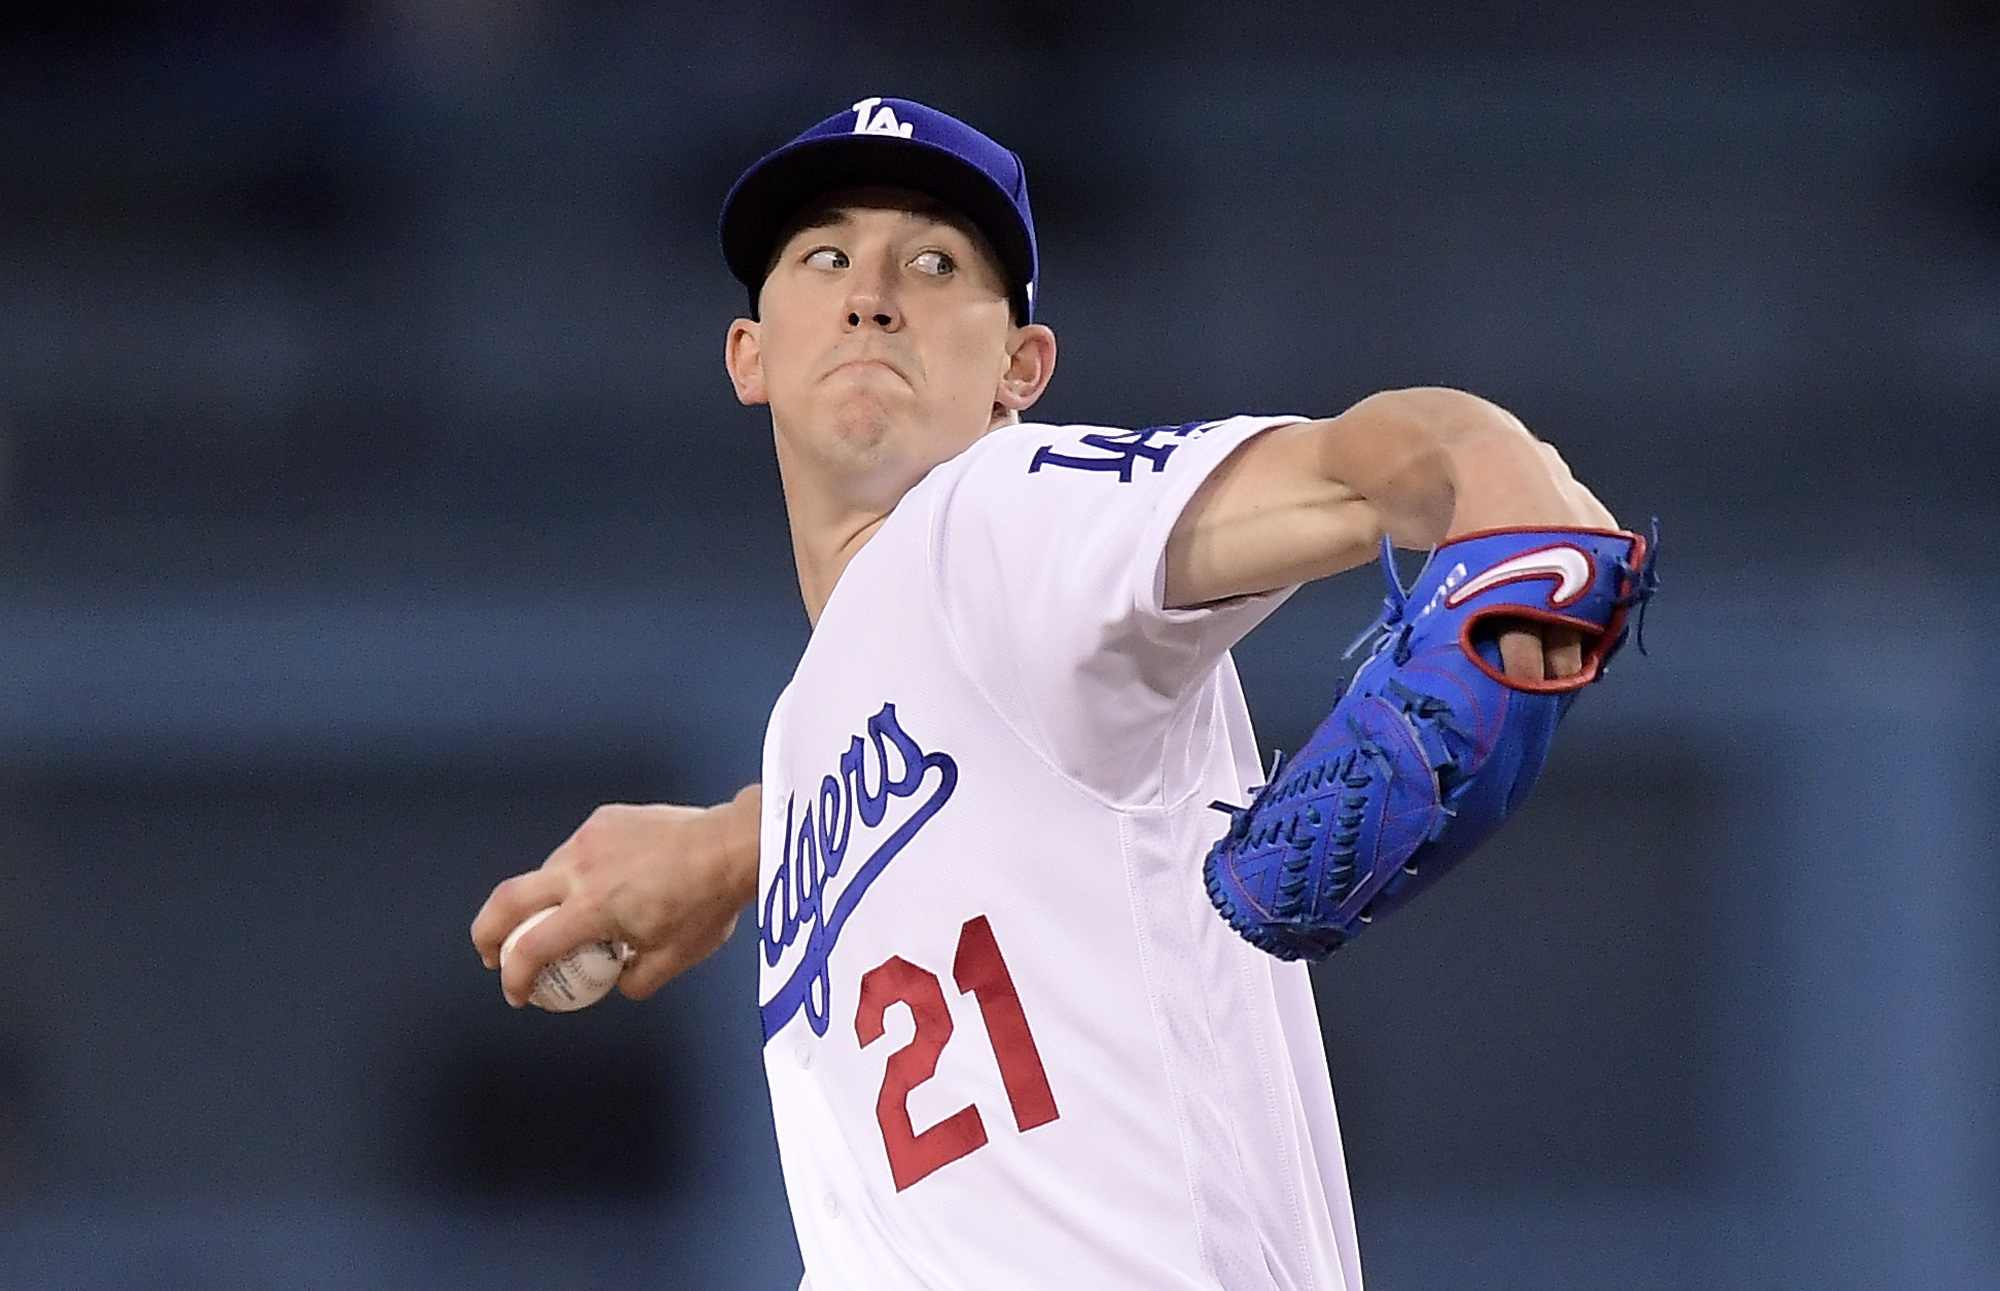 Buehler pitches Dodgers past Braves 5-3 in playoff rematch